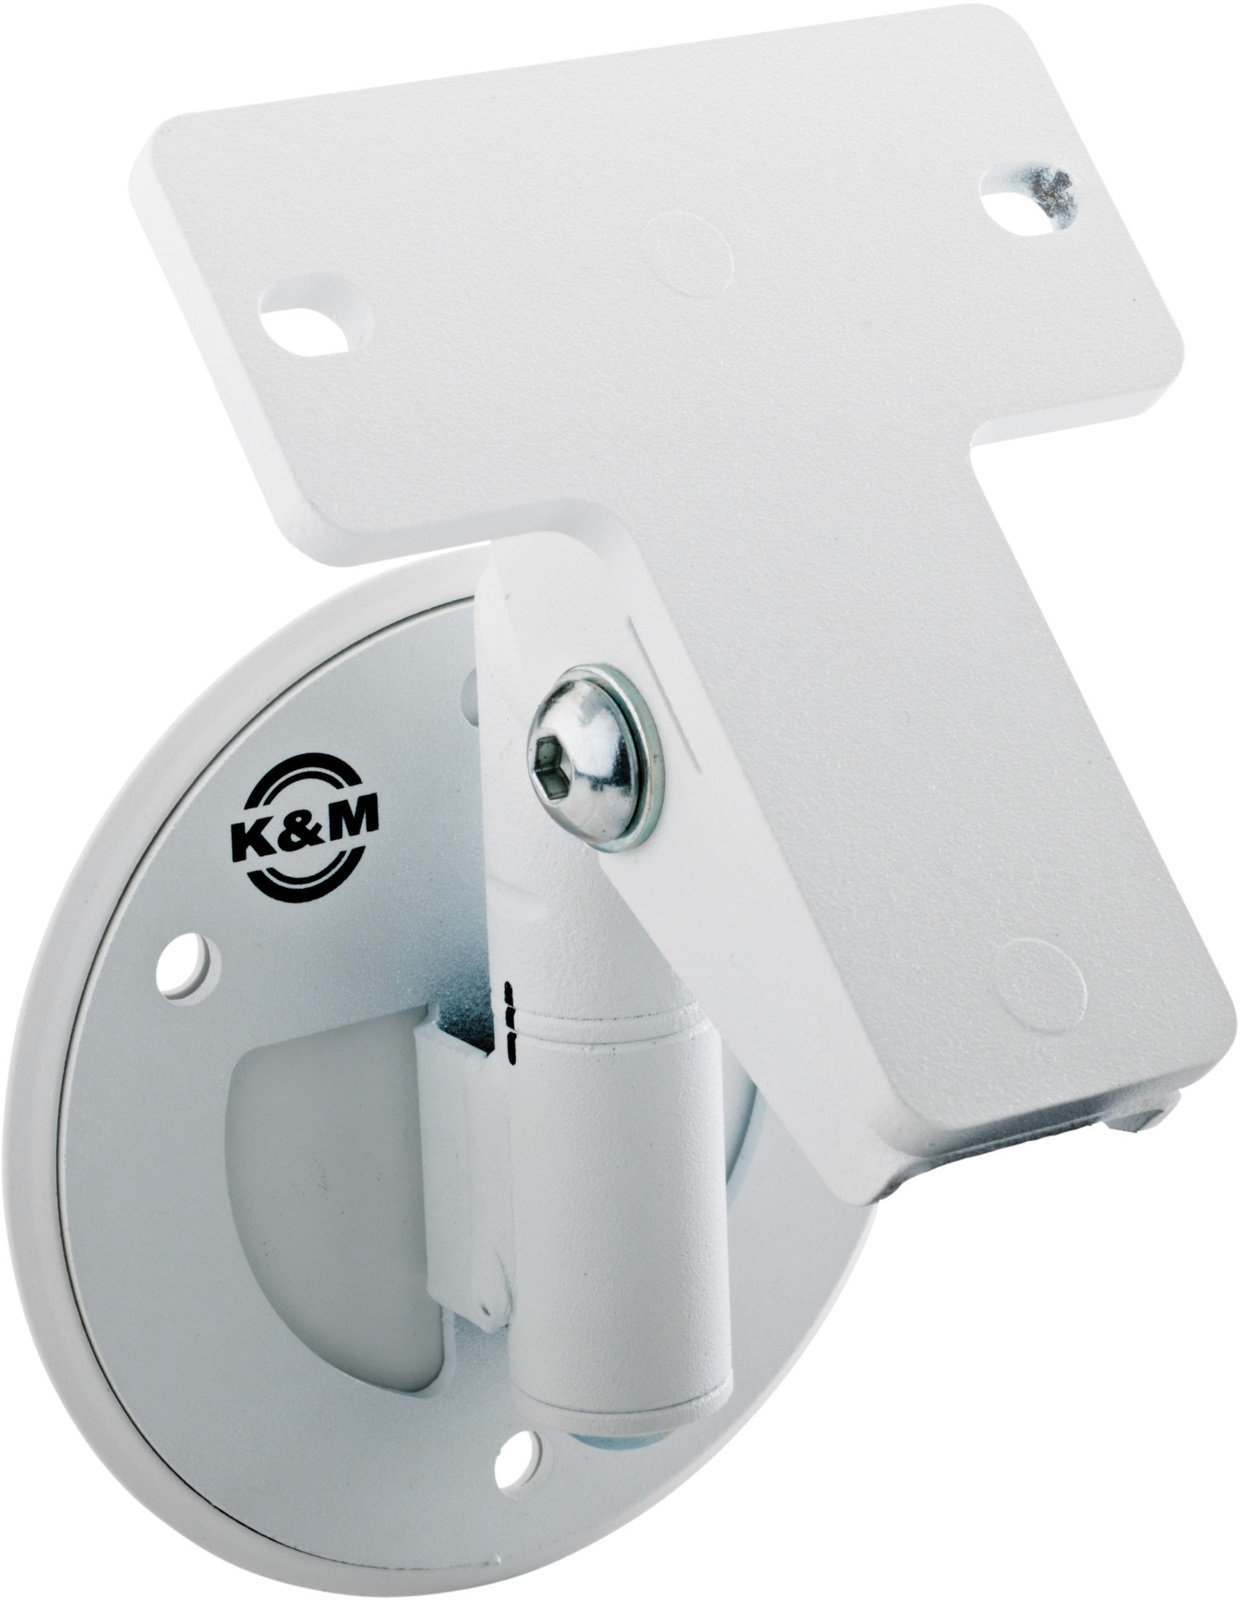 Wall mount for speakerboxes Konig & Meyer 24161 WH Wall mount for speakerboxes